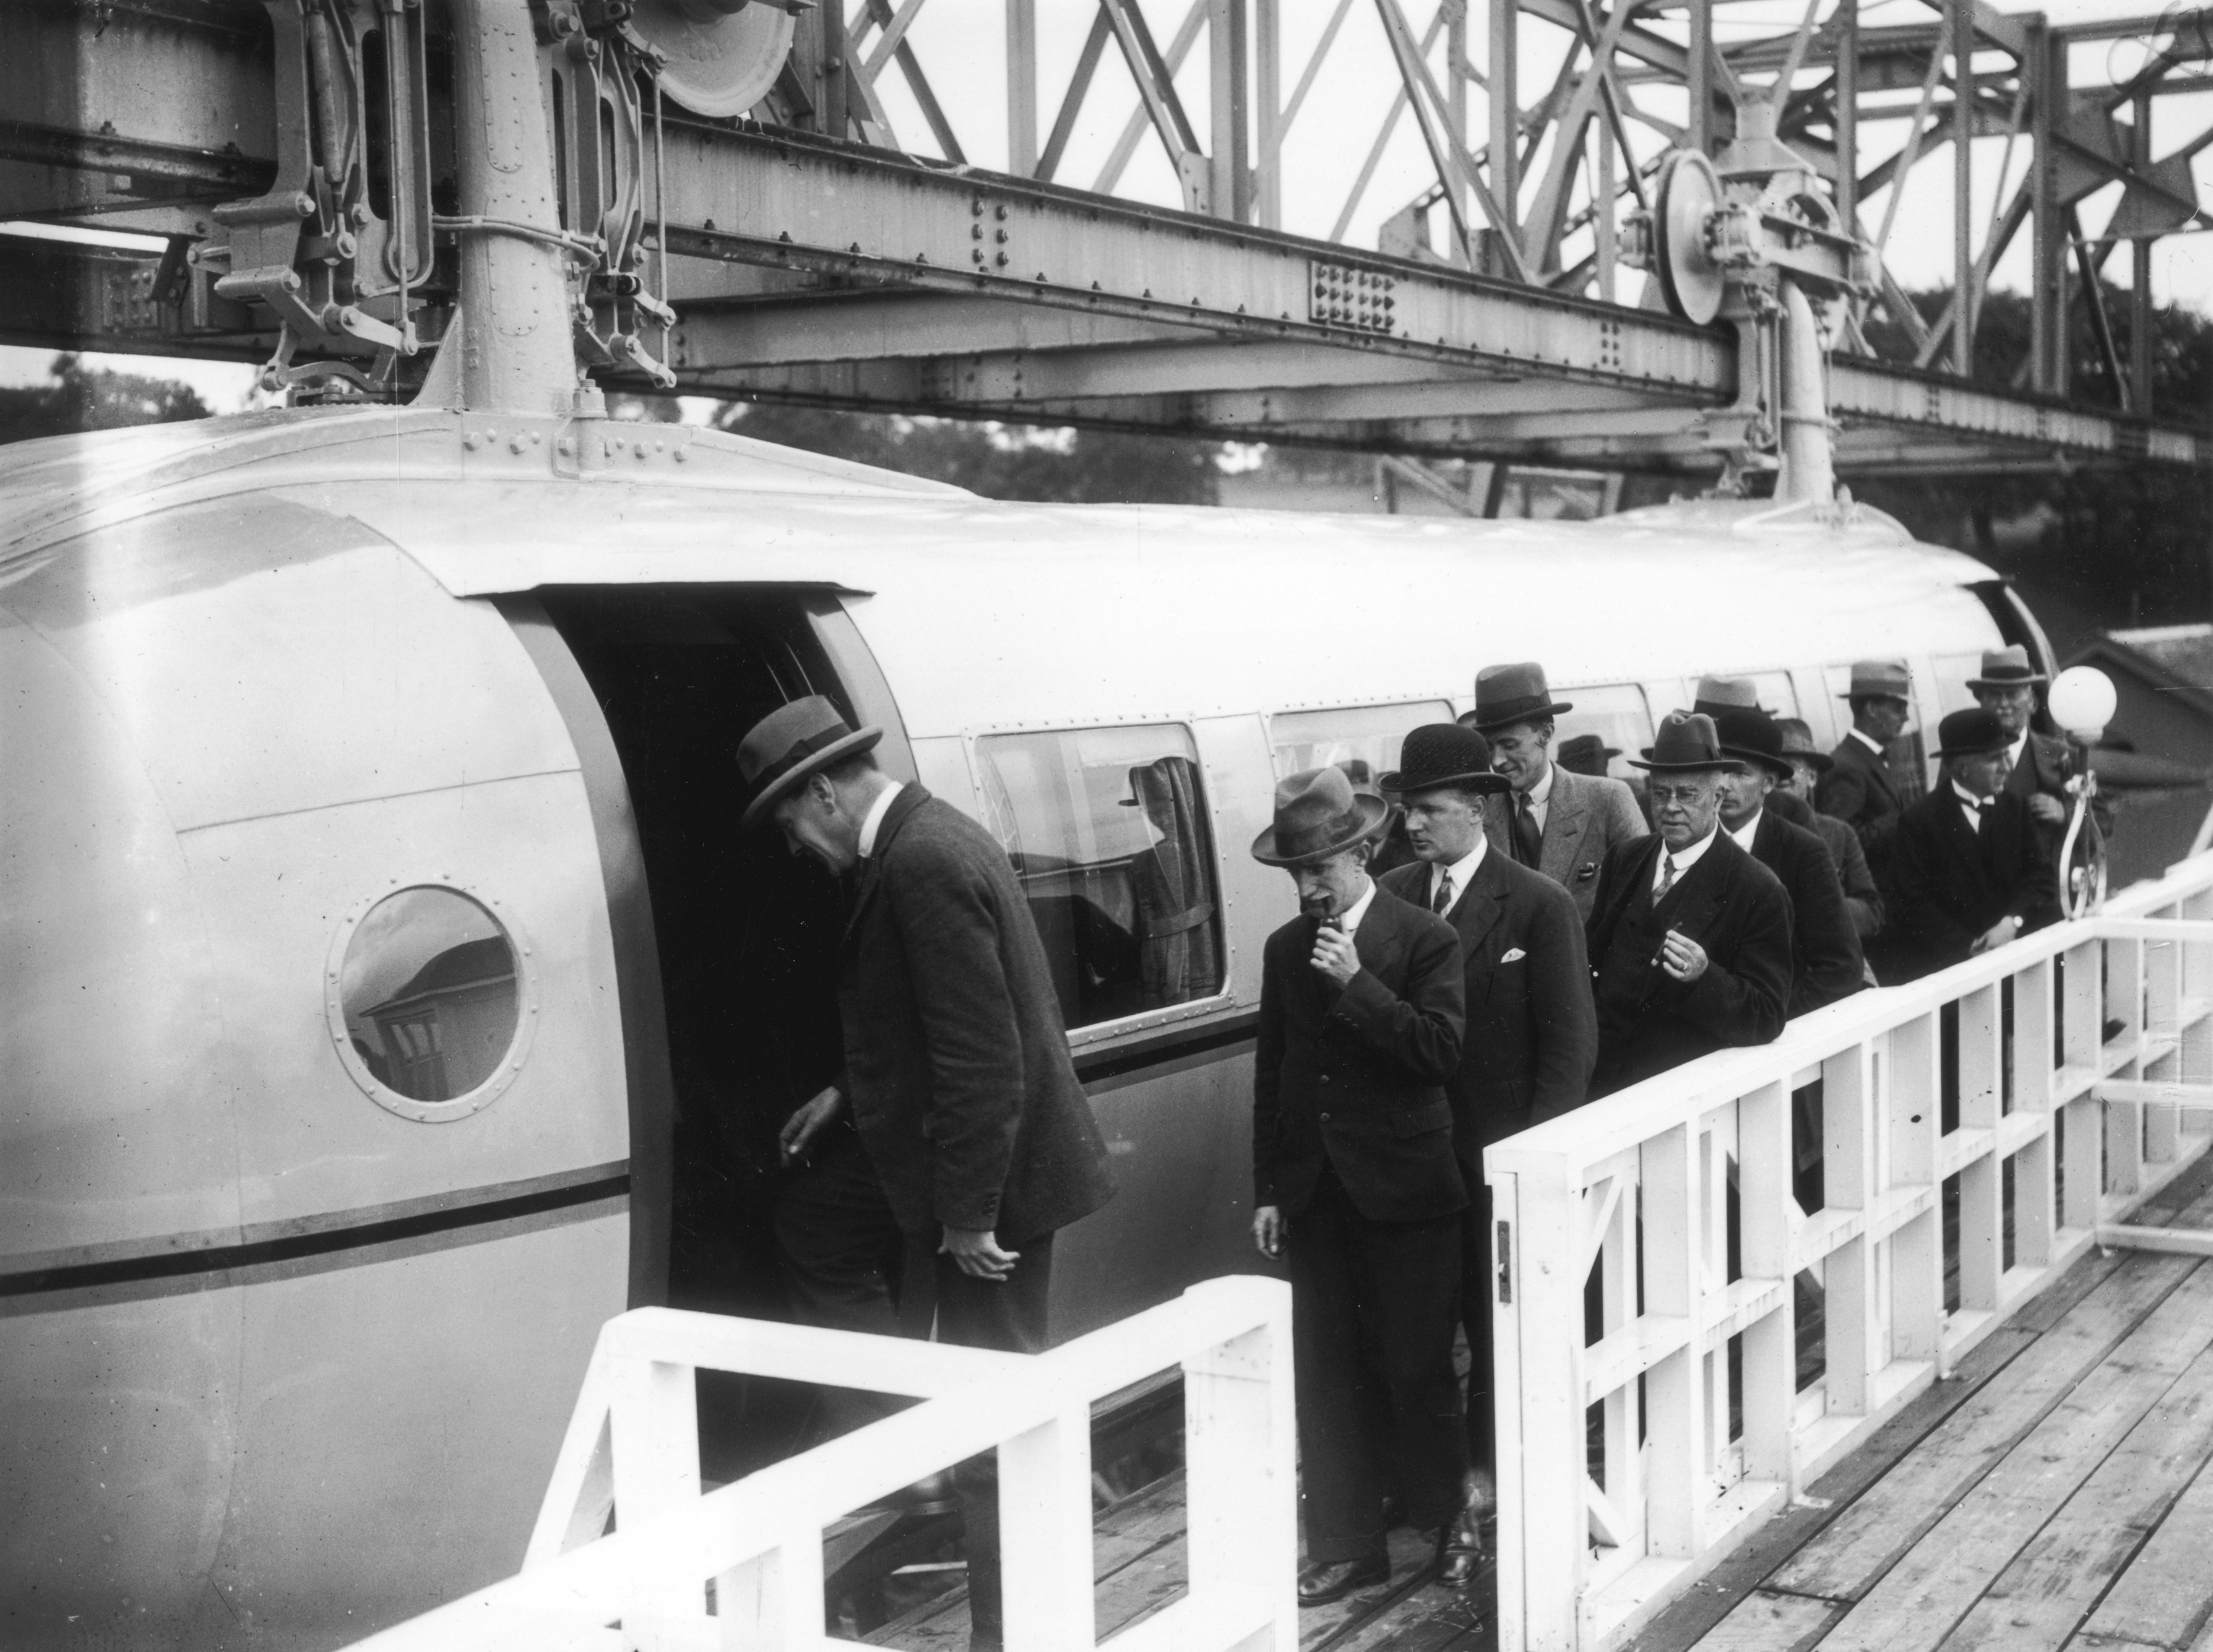 4th July 1930: The first load of passengers queuing for the Bennie Railplane in Glasgow; the inventor George Bennie is third in the queue. The streamlined cars are self propelled, driven by air screws in front and behind, and hang from a steel girder. (Photo by J. A. Hampton/Topical Press Agency/Getty Images)